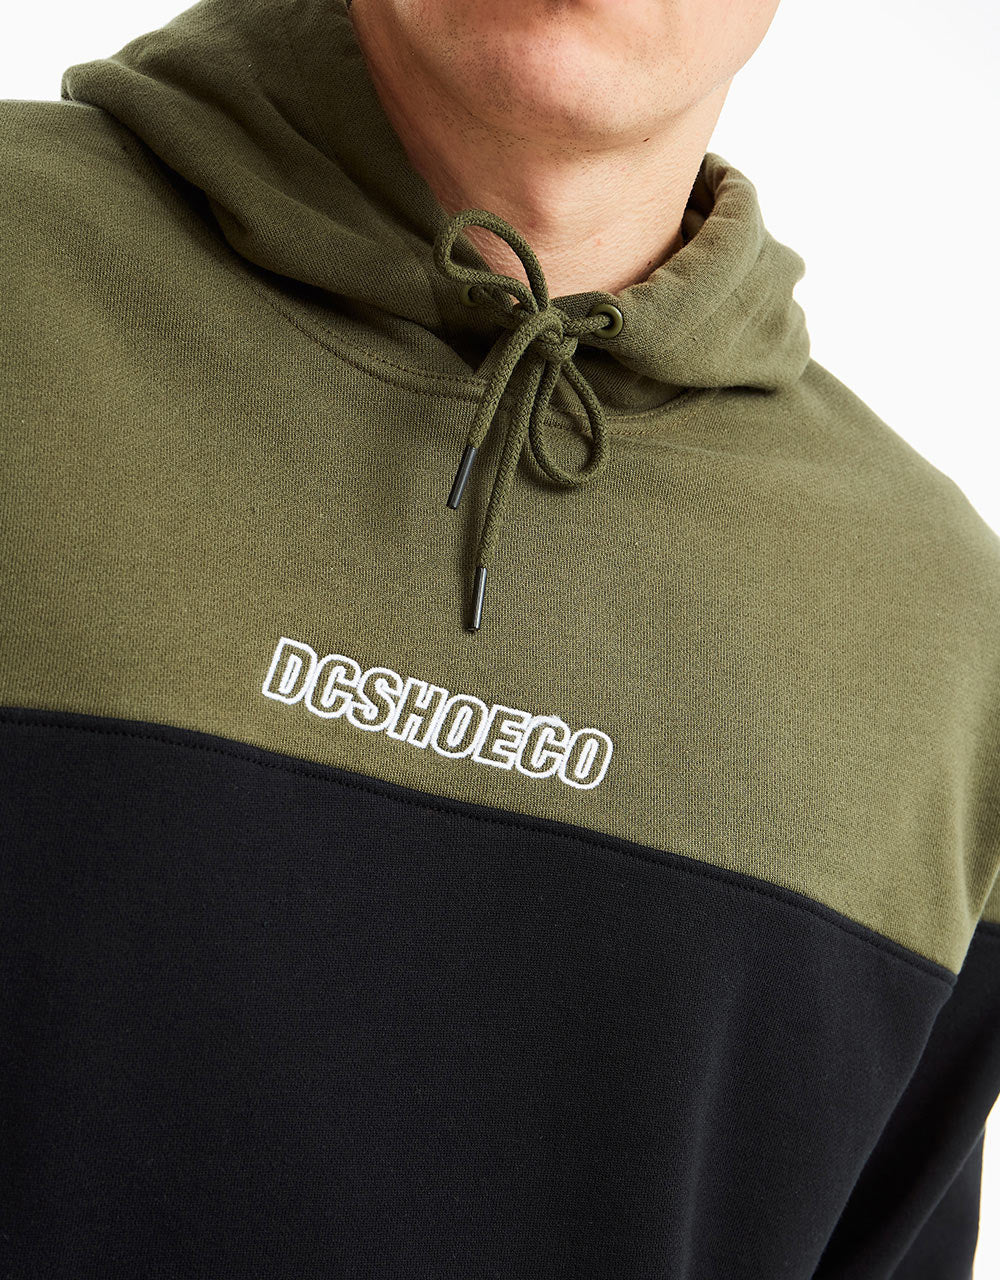 DC Downing Pullover Hoodie - Ivy Green